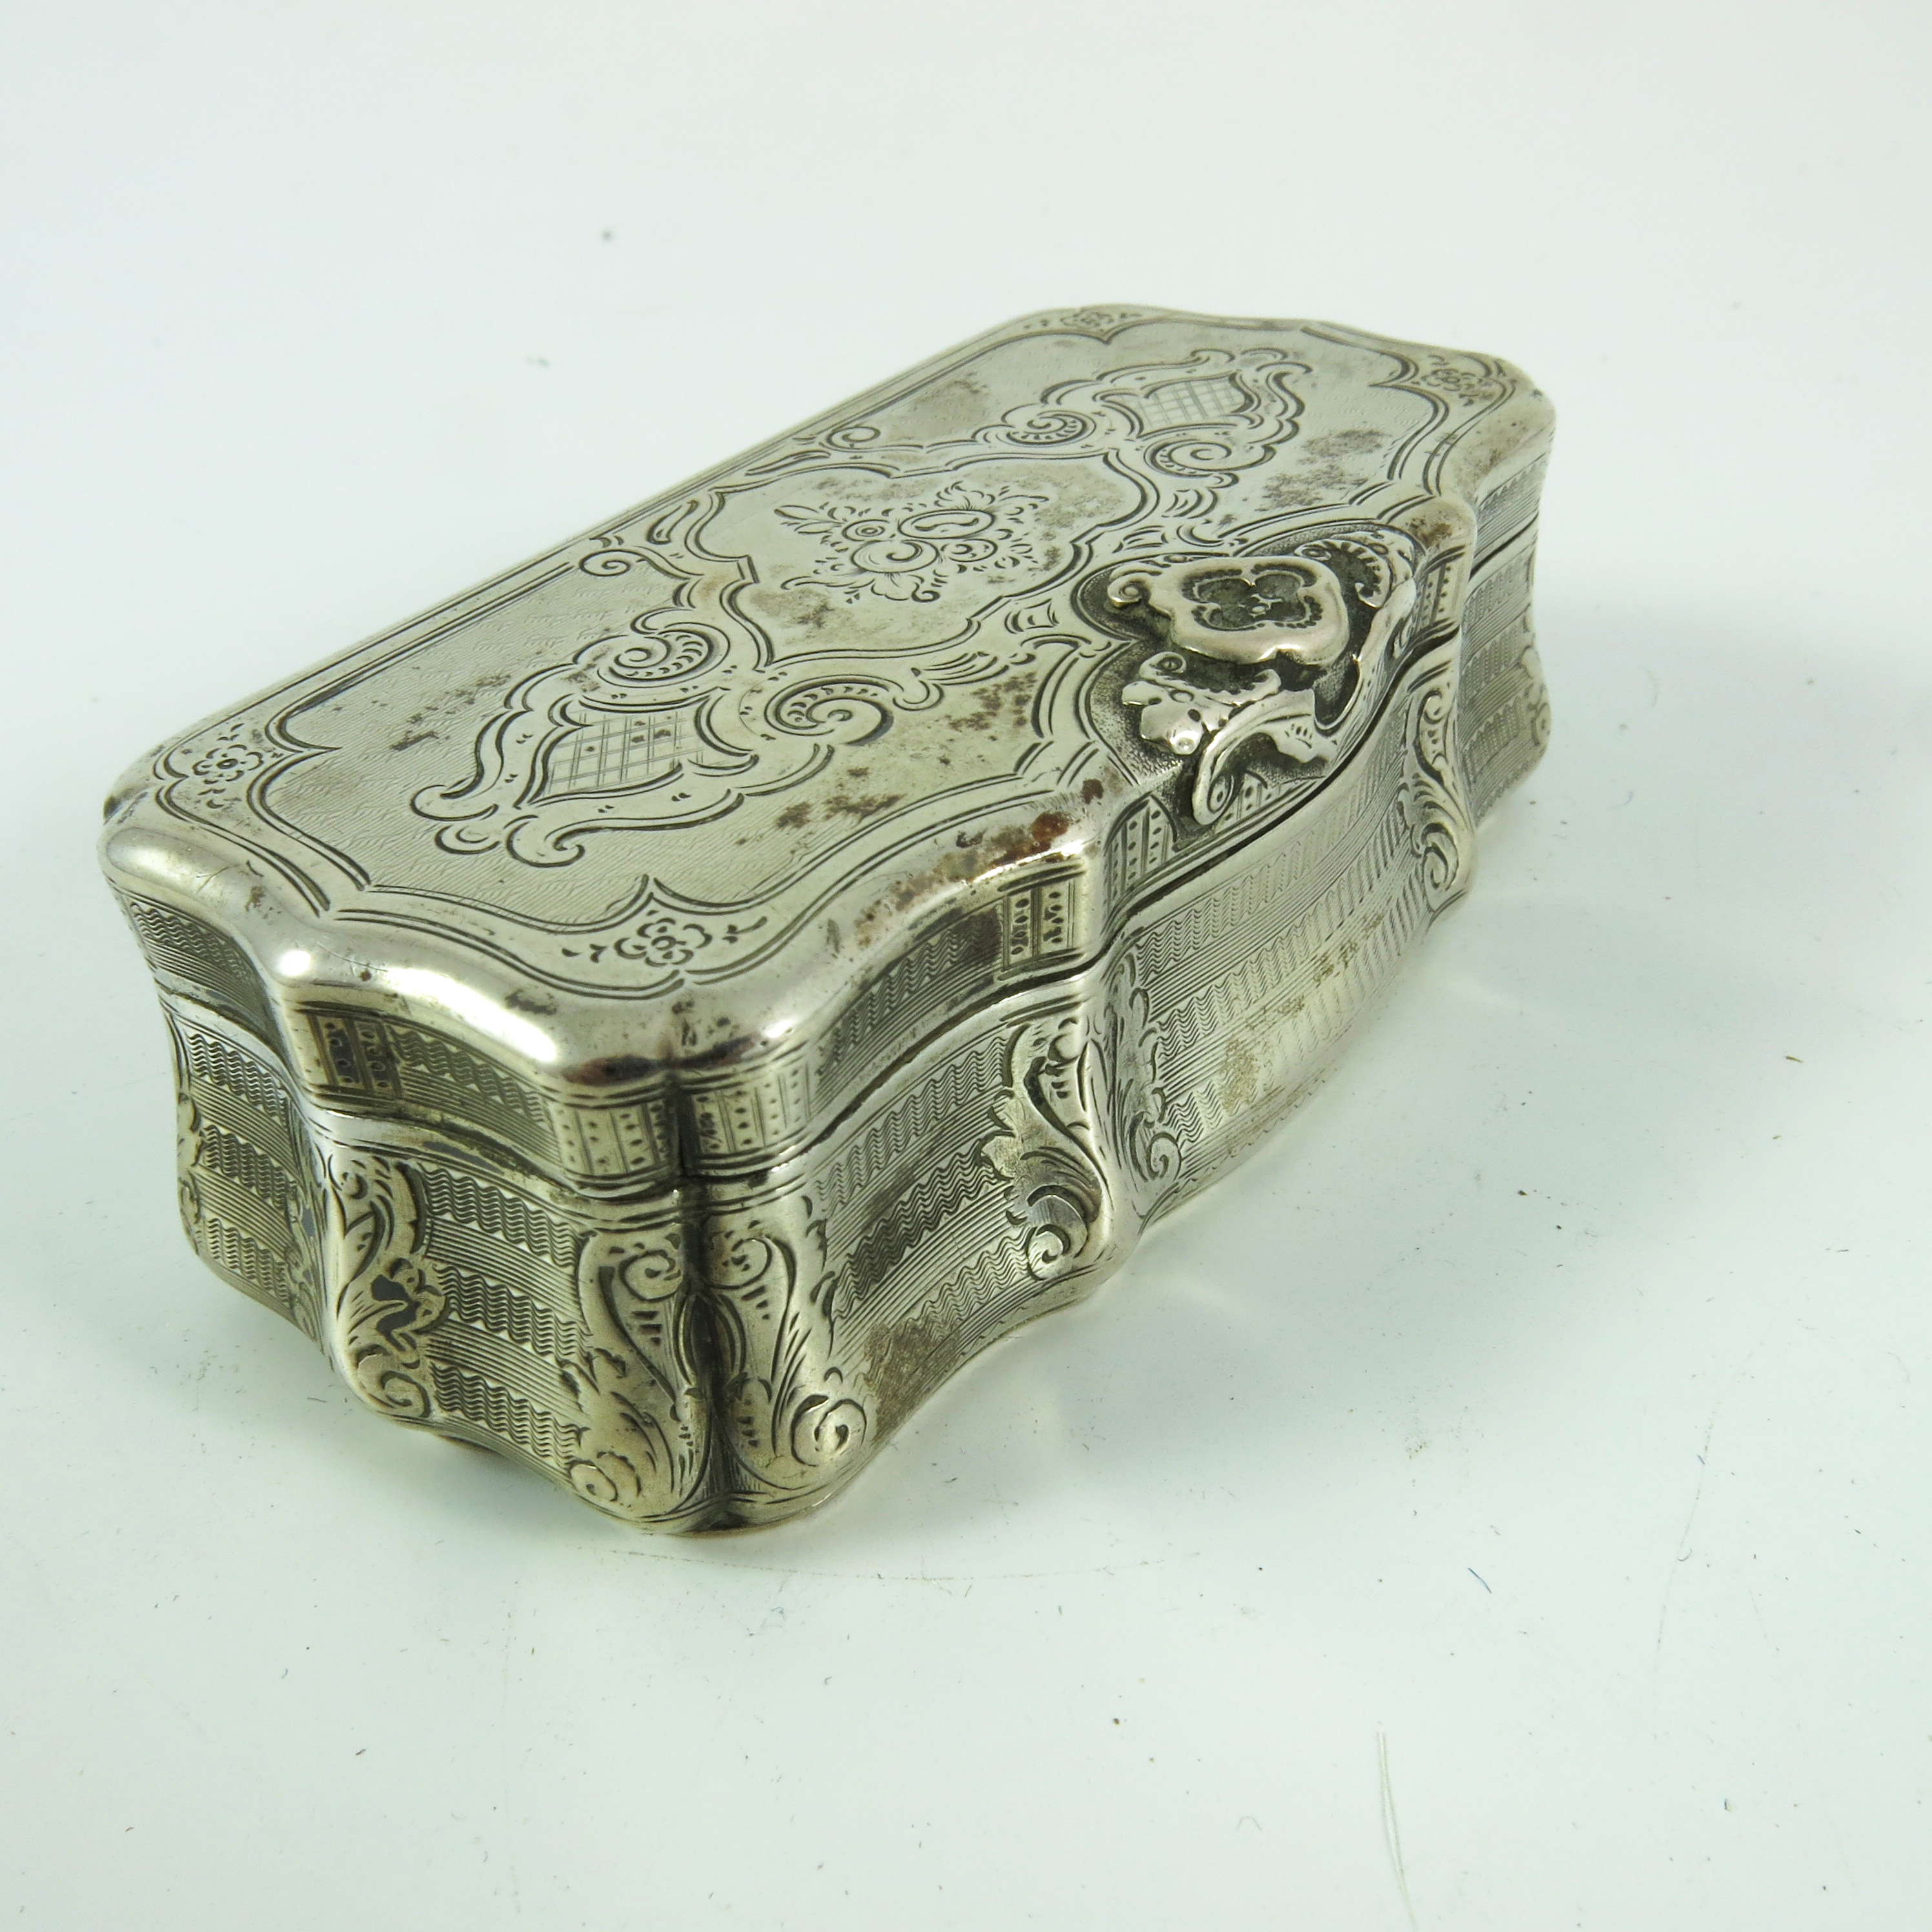 CONTINENTAL, POSSIBLY DUTCH, WHITE METAL TRINKET BOX WITH HINGED COVER - Image 3 of 6